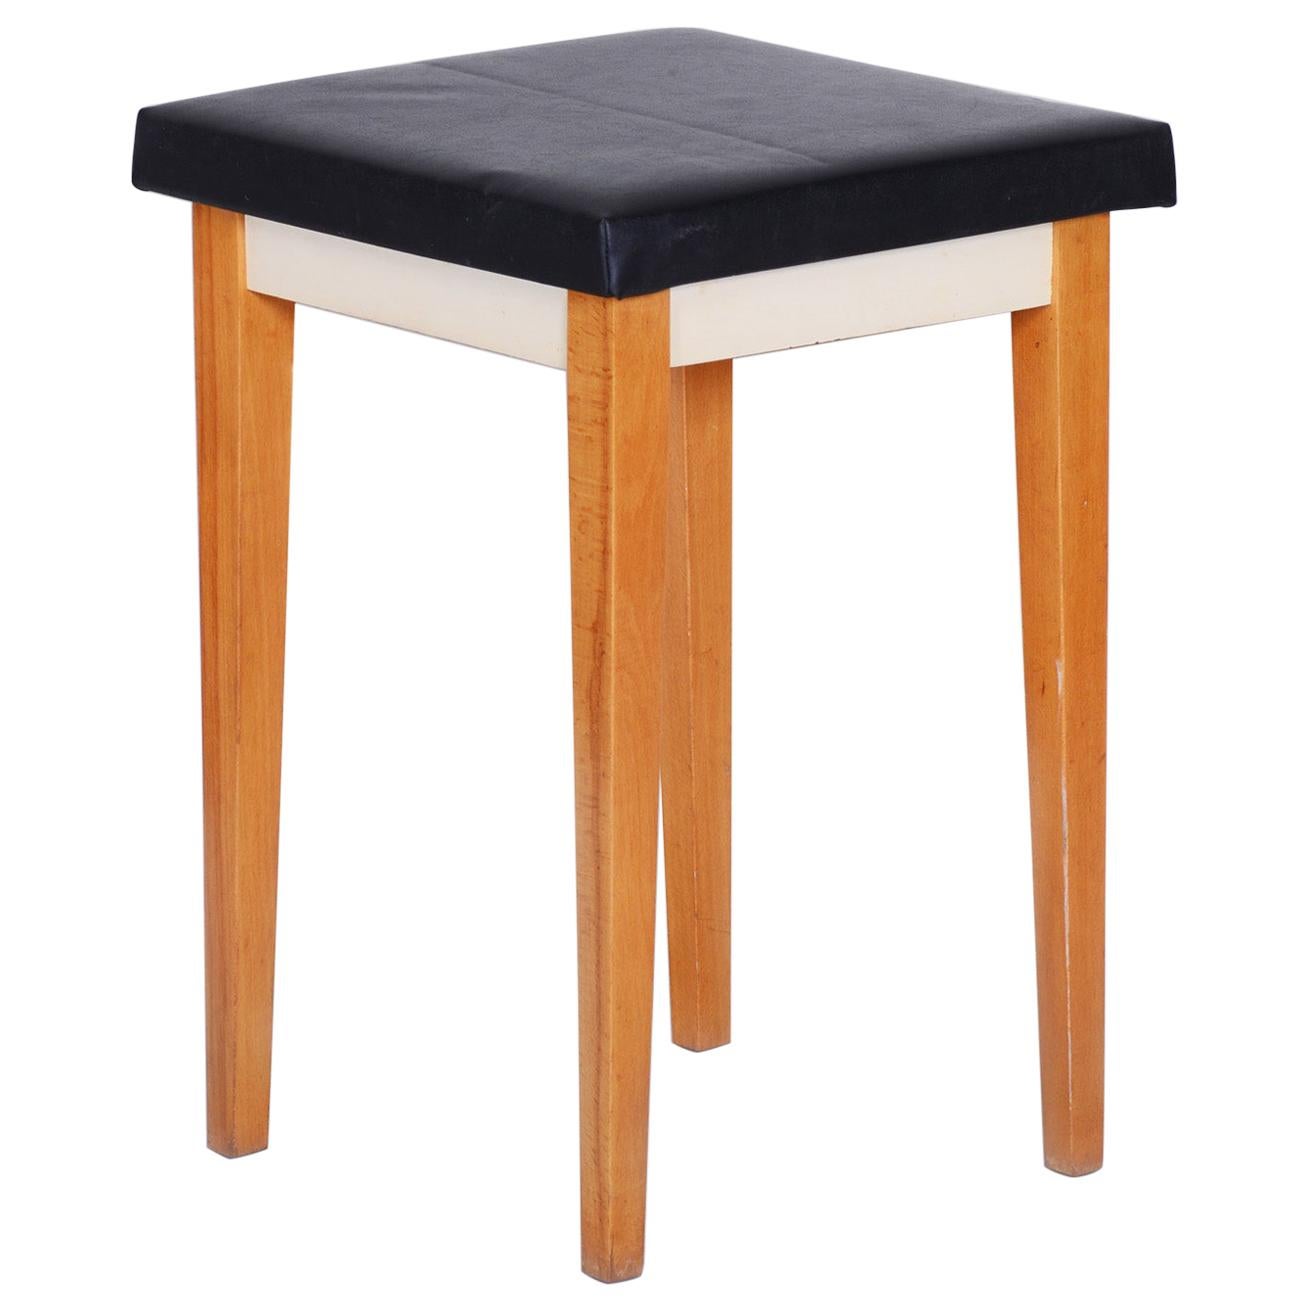 Black Midcentury Beech Stool, 1950s, Original Preserved Condition For Sale